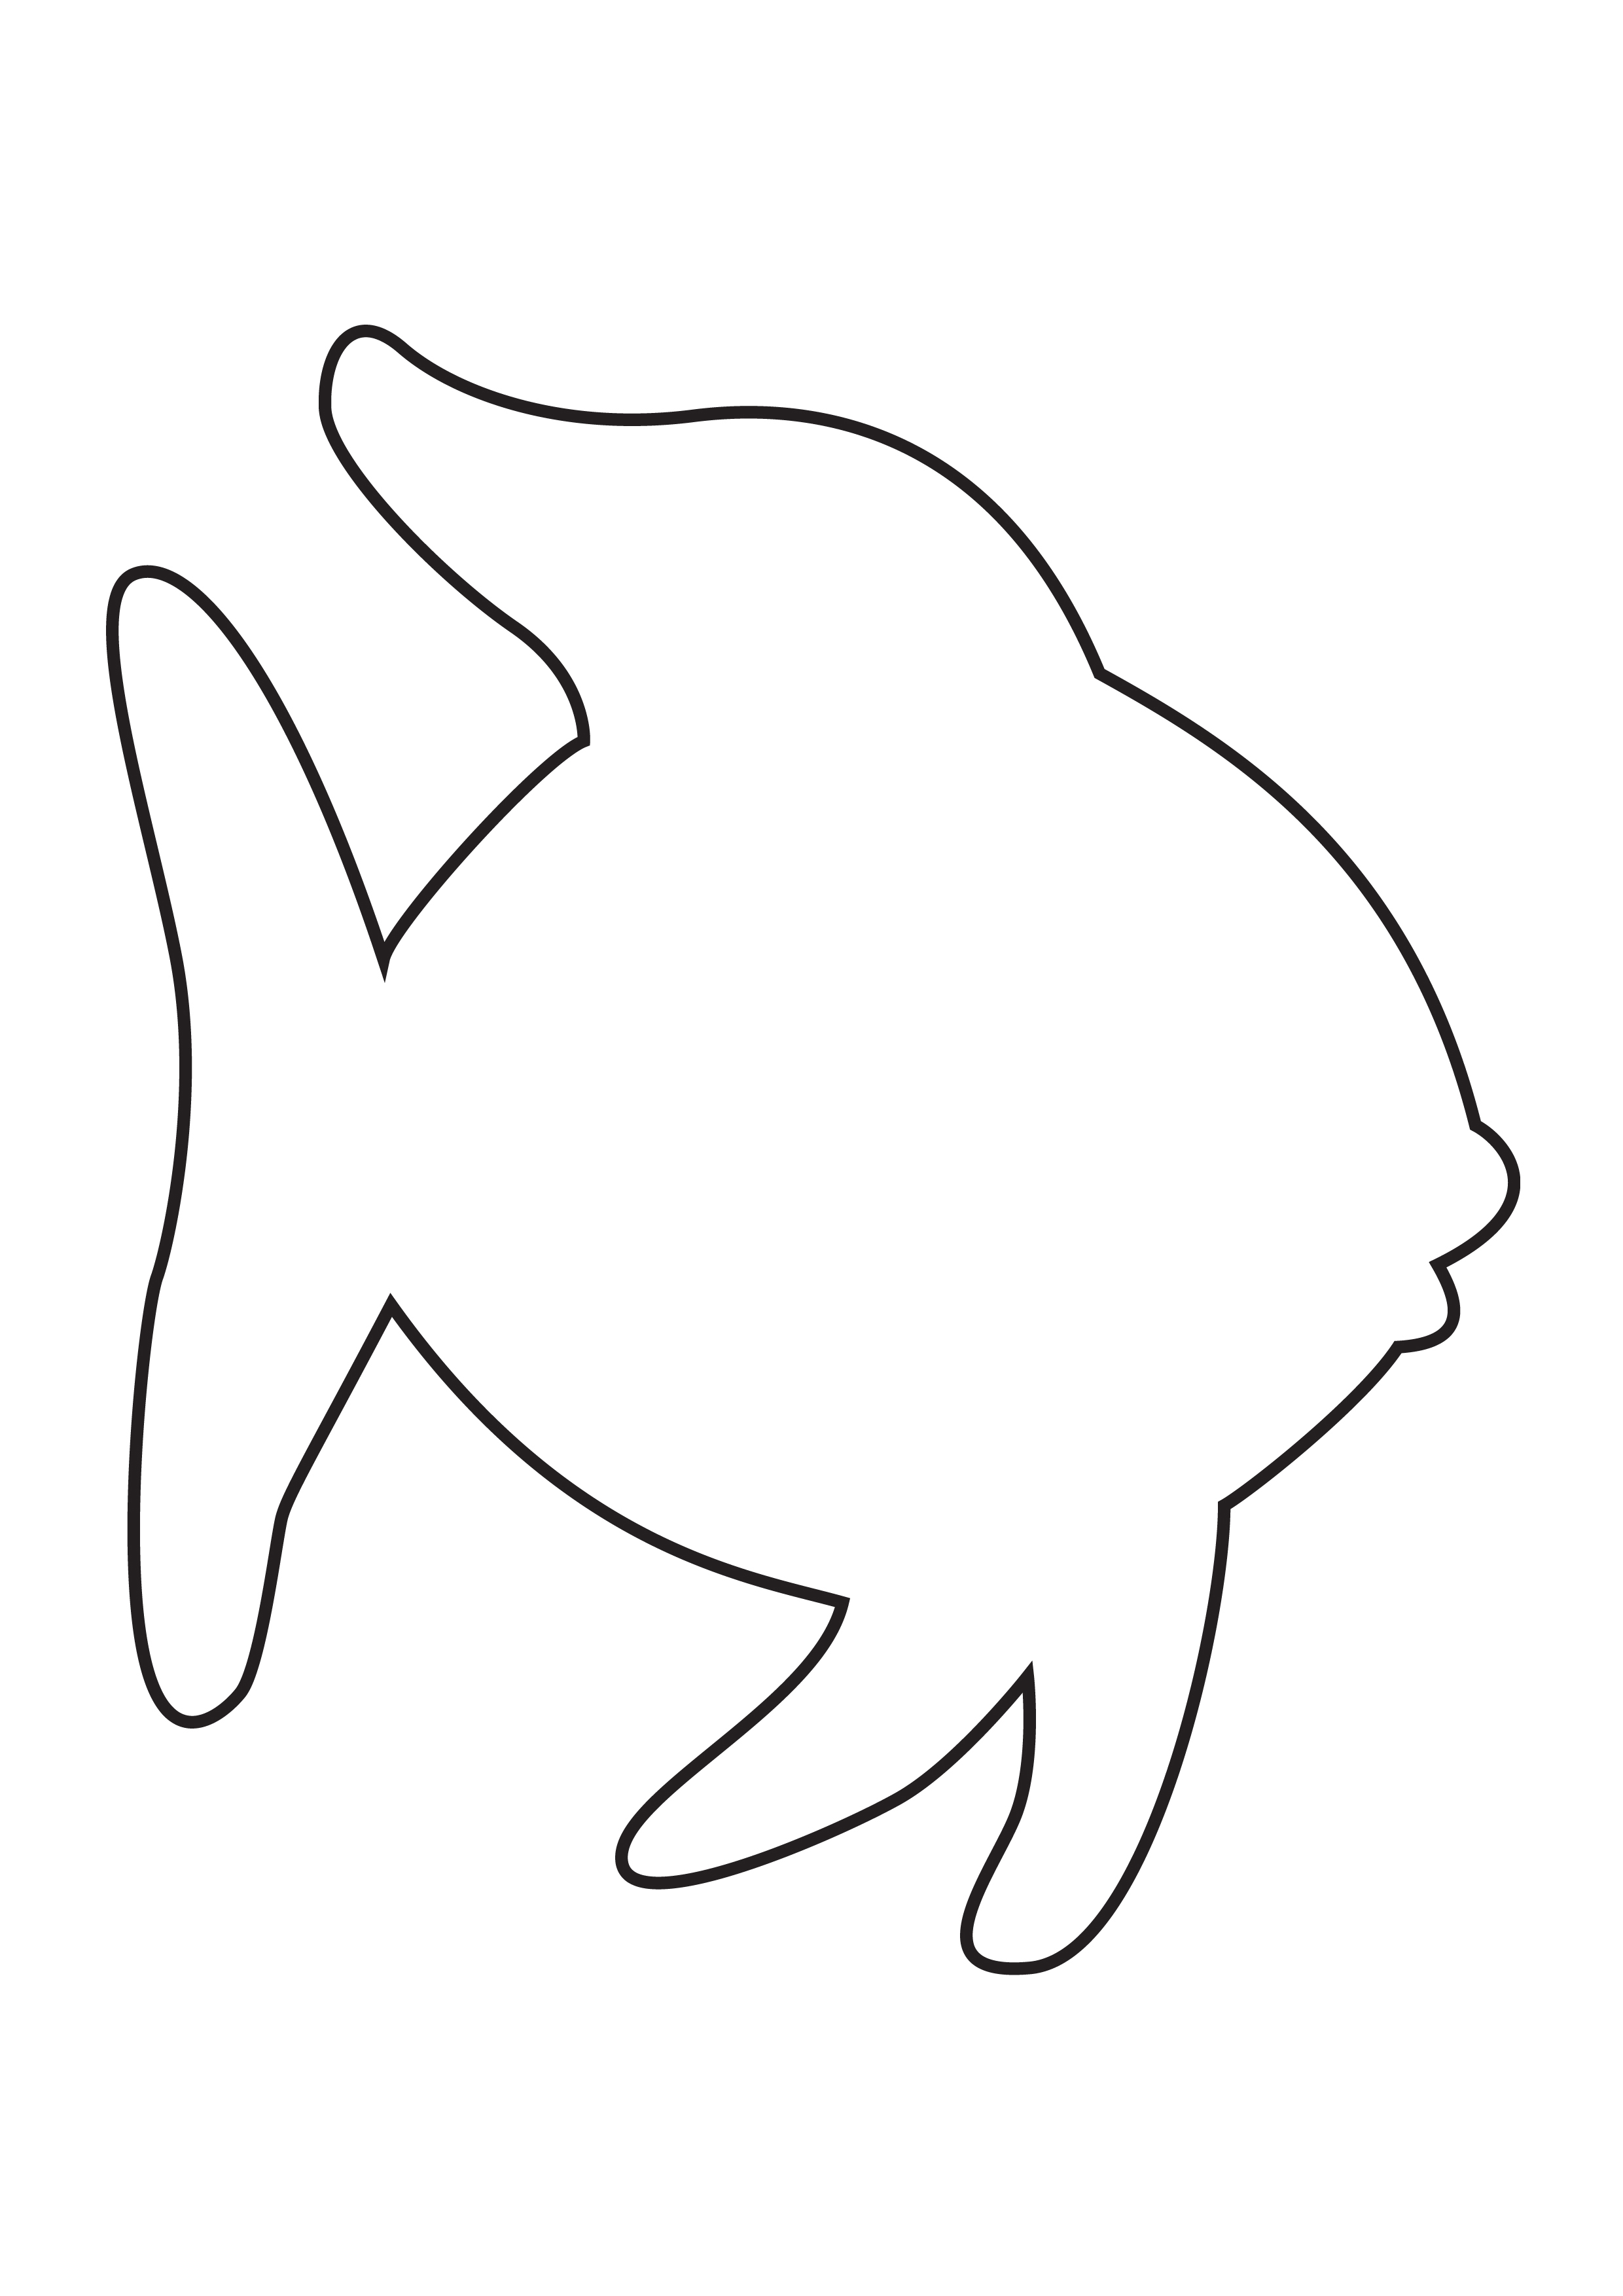 Fish Outline Template Cliparts co